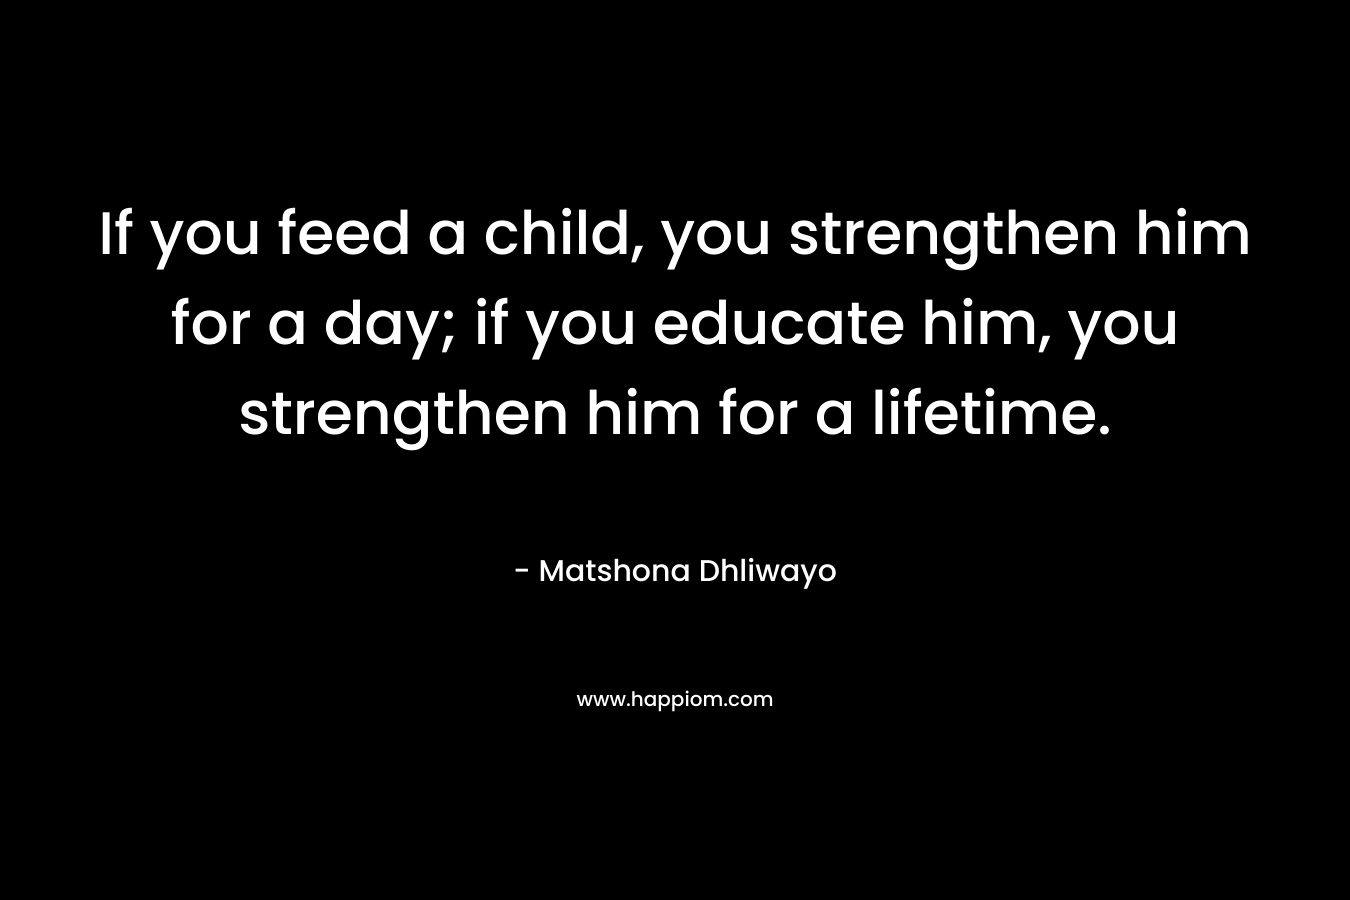 If you feed a child, you strengthen him for a day; if you educate him, you strengthen him for a lifetime.